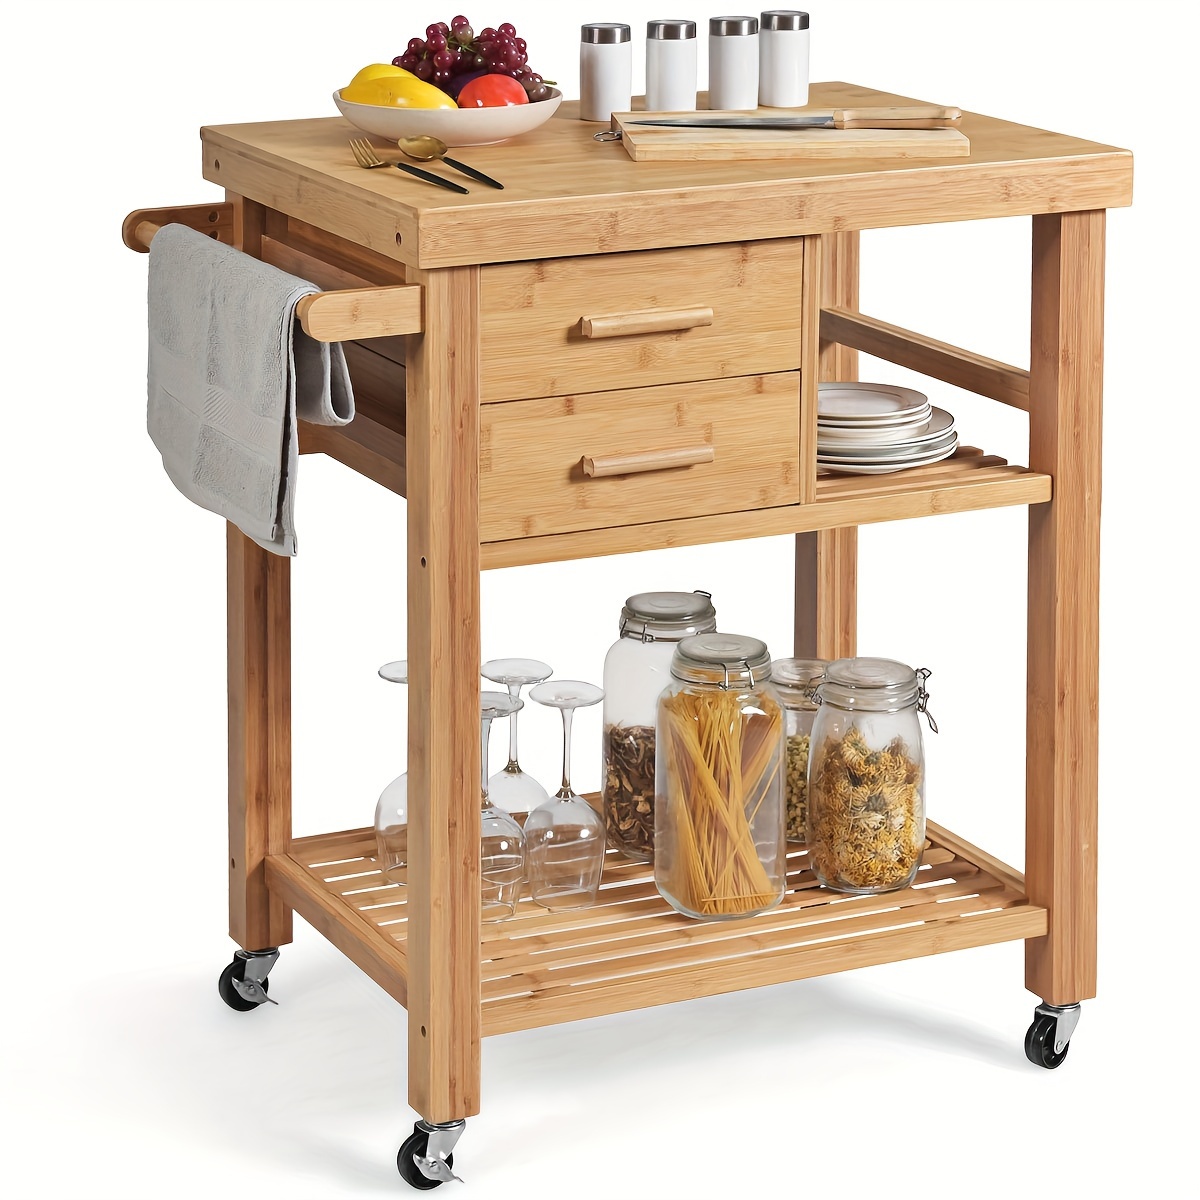 

1set Bamboo Rolling Kitchen Trolley Cart With Towel Rack And Drawers, Classic Style, Portable Wood Island On Wheels, Versatile Storage For Home And Dining, 32.5x19.7x35.5 Inches